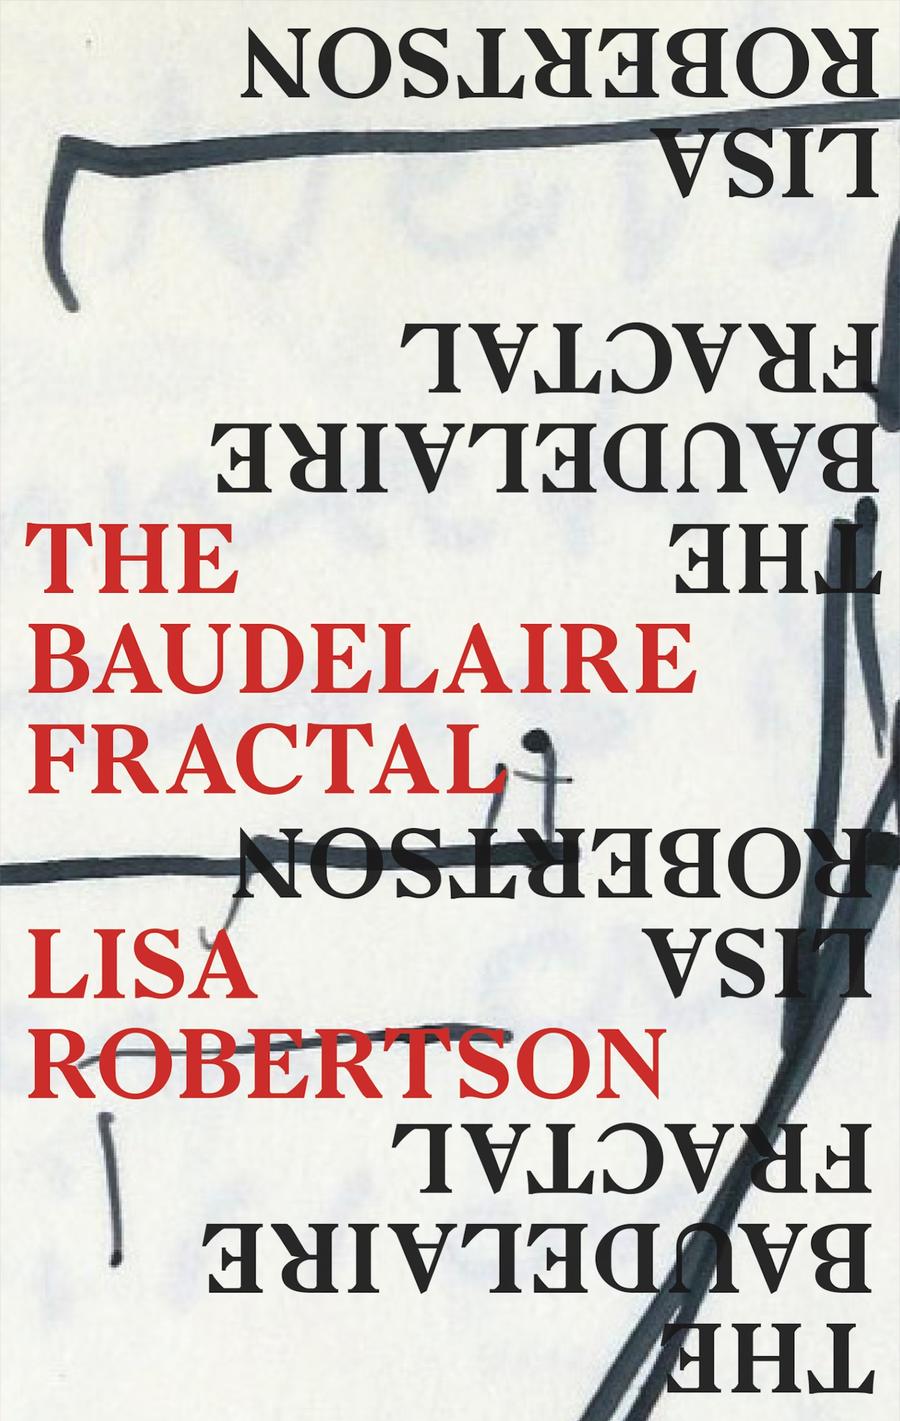 The cover of The Baudelaire Fractal